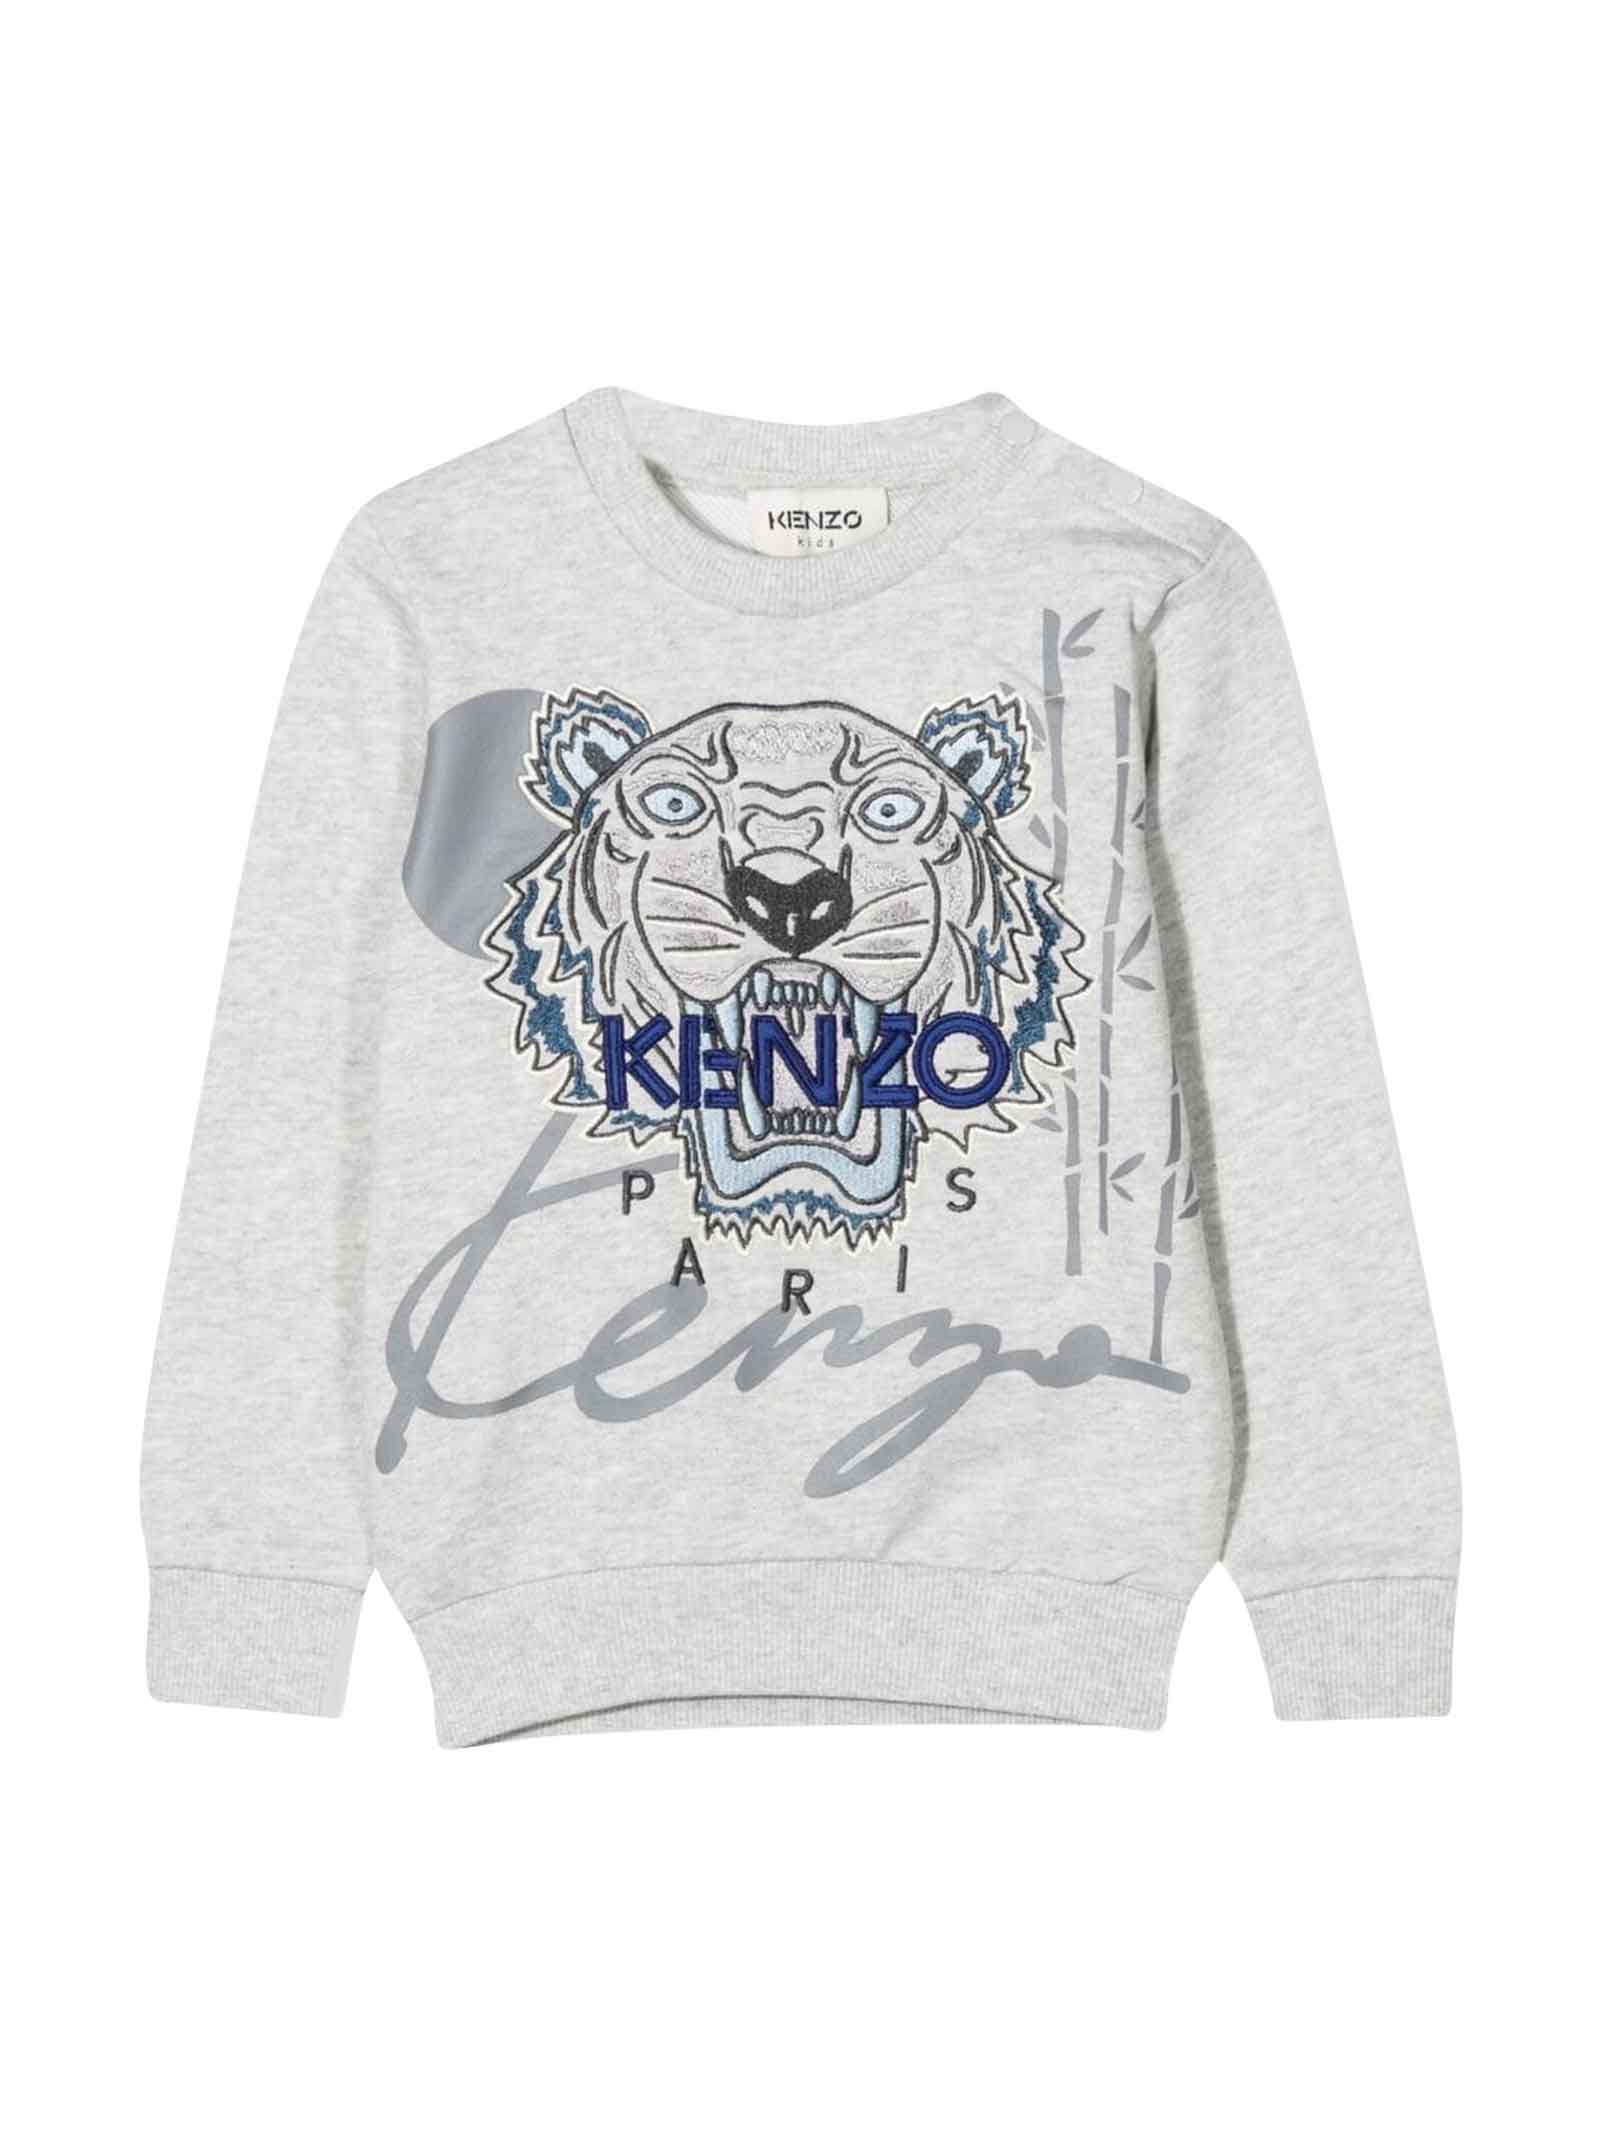 Kenzo Kids Grey Newborn Sweatshirt With Front Logo Embroidery, Crew Neck, Long Sleeves And Straight Hem By